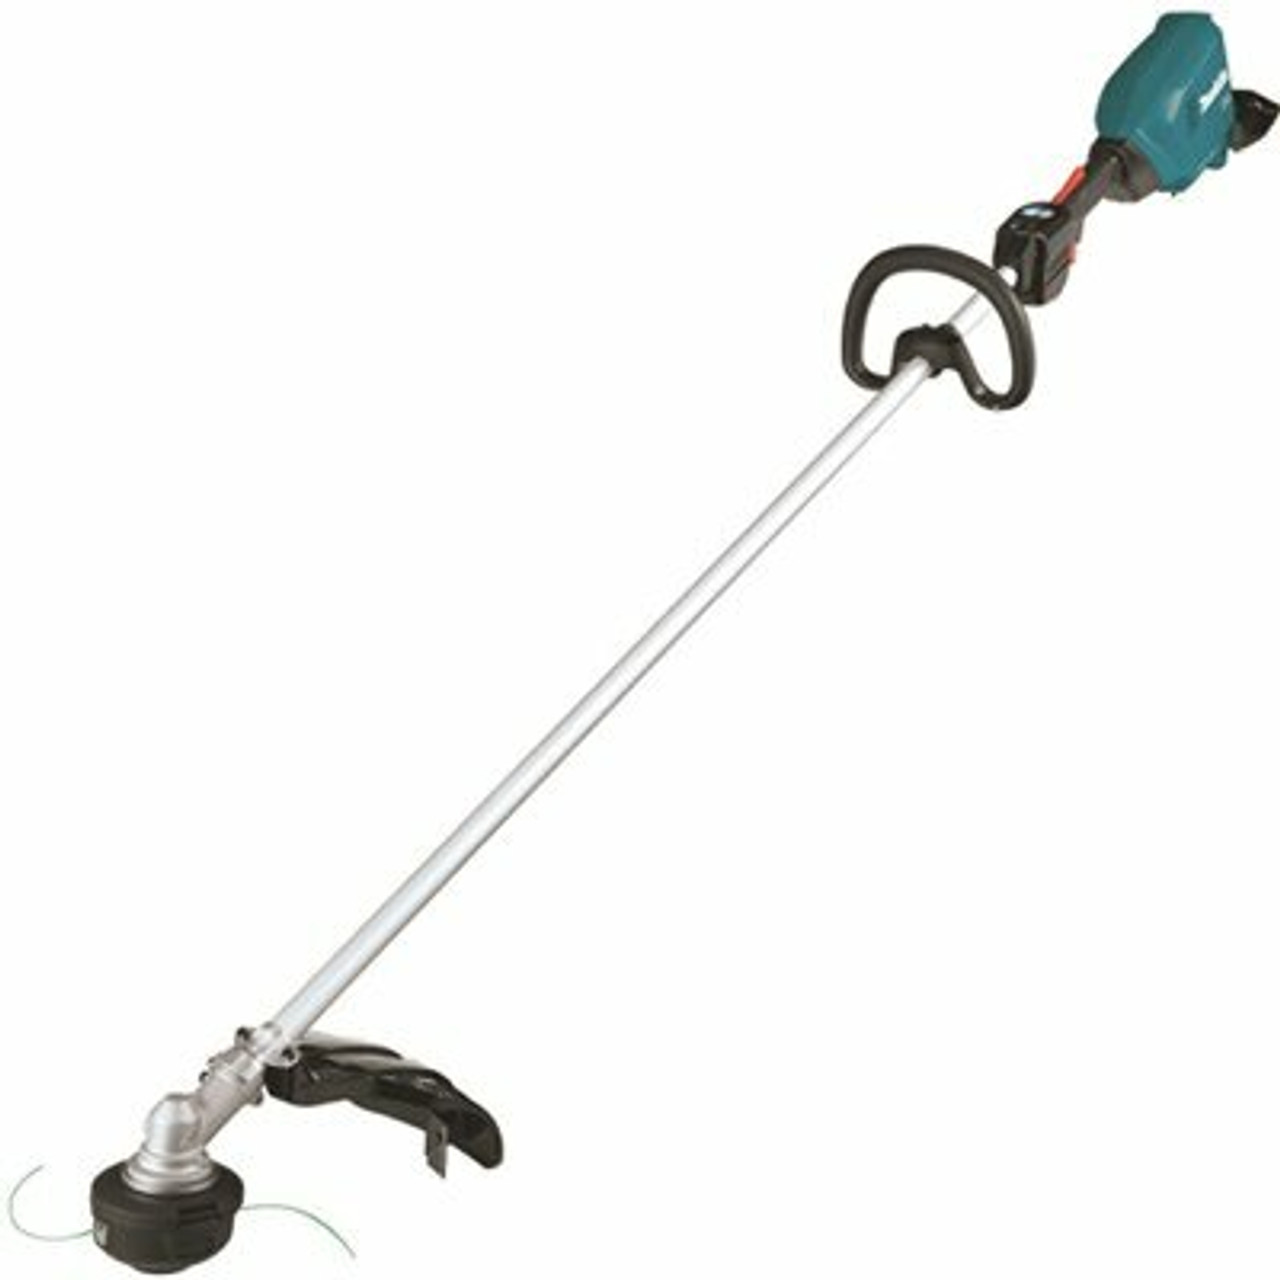 Makita 18-Volt X2 (36-Volt) Lxt Lithium-Ion Brushless Cordless String Trimmer (Tool-Only) - 312974651